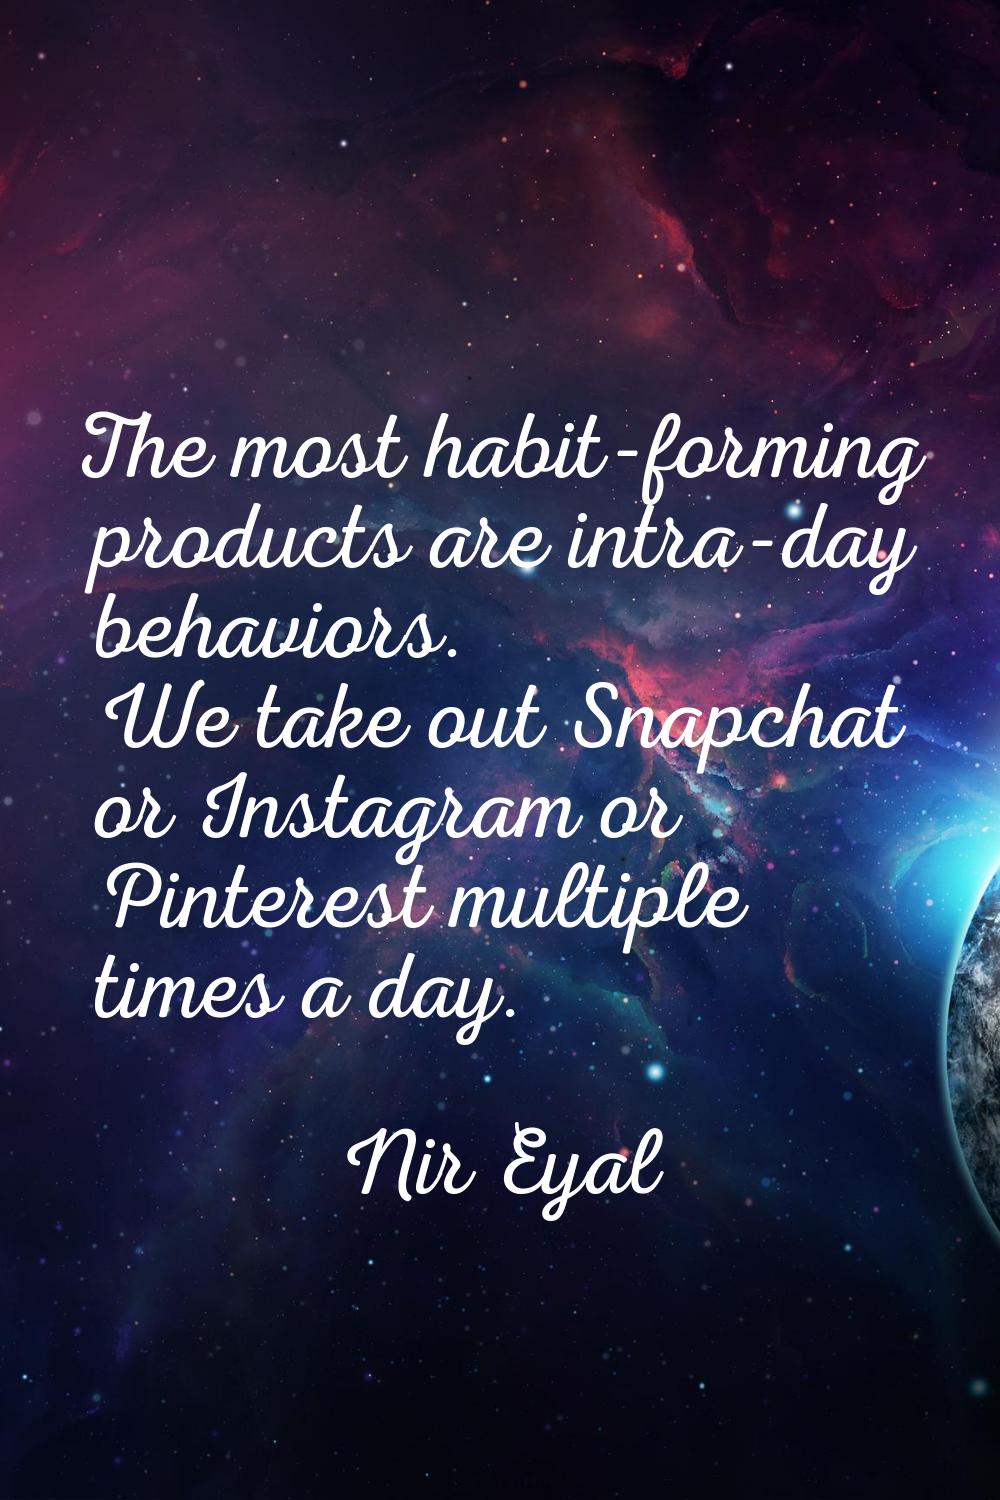 The most habit-forming products are intra-day behaviors. We take out Snapchat or Instagram or Pinte